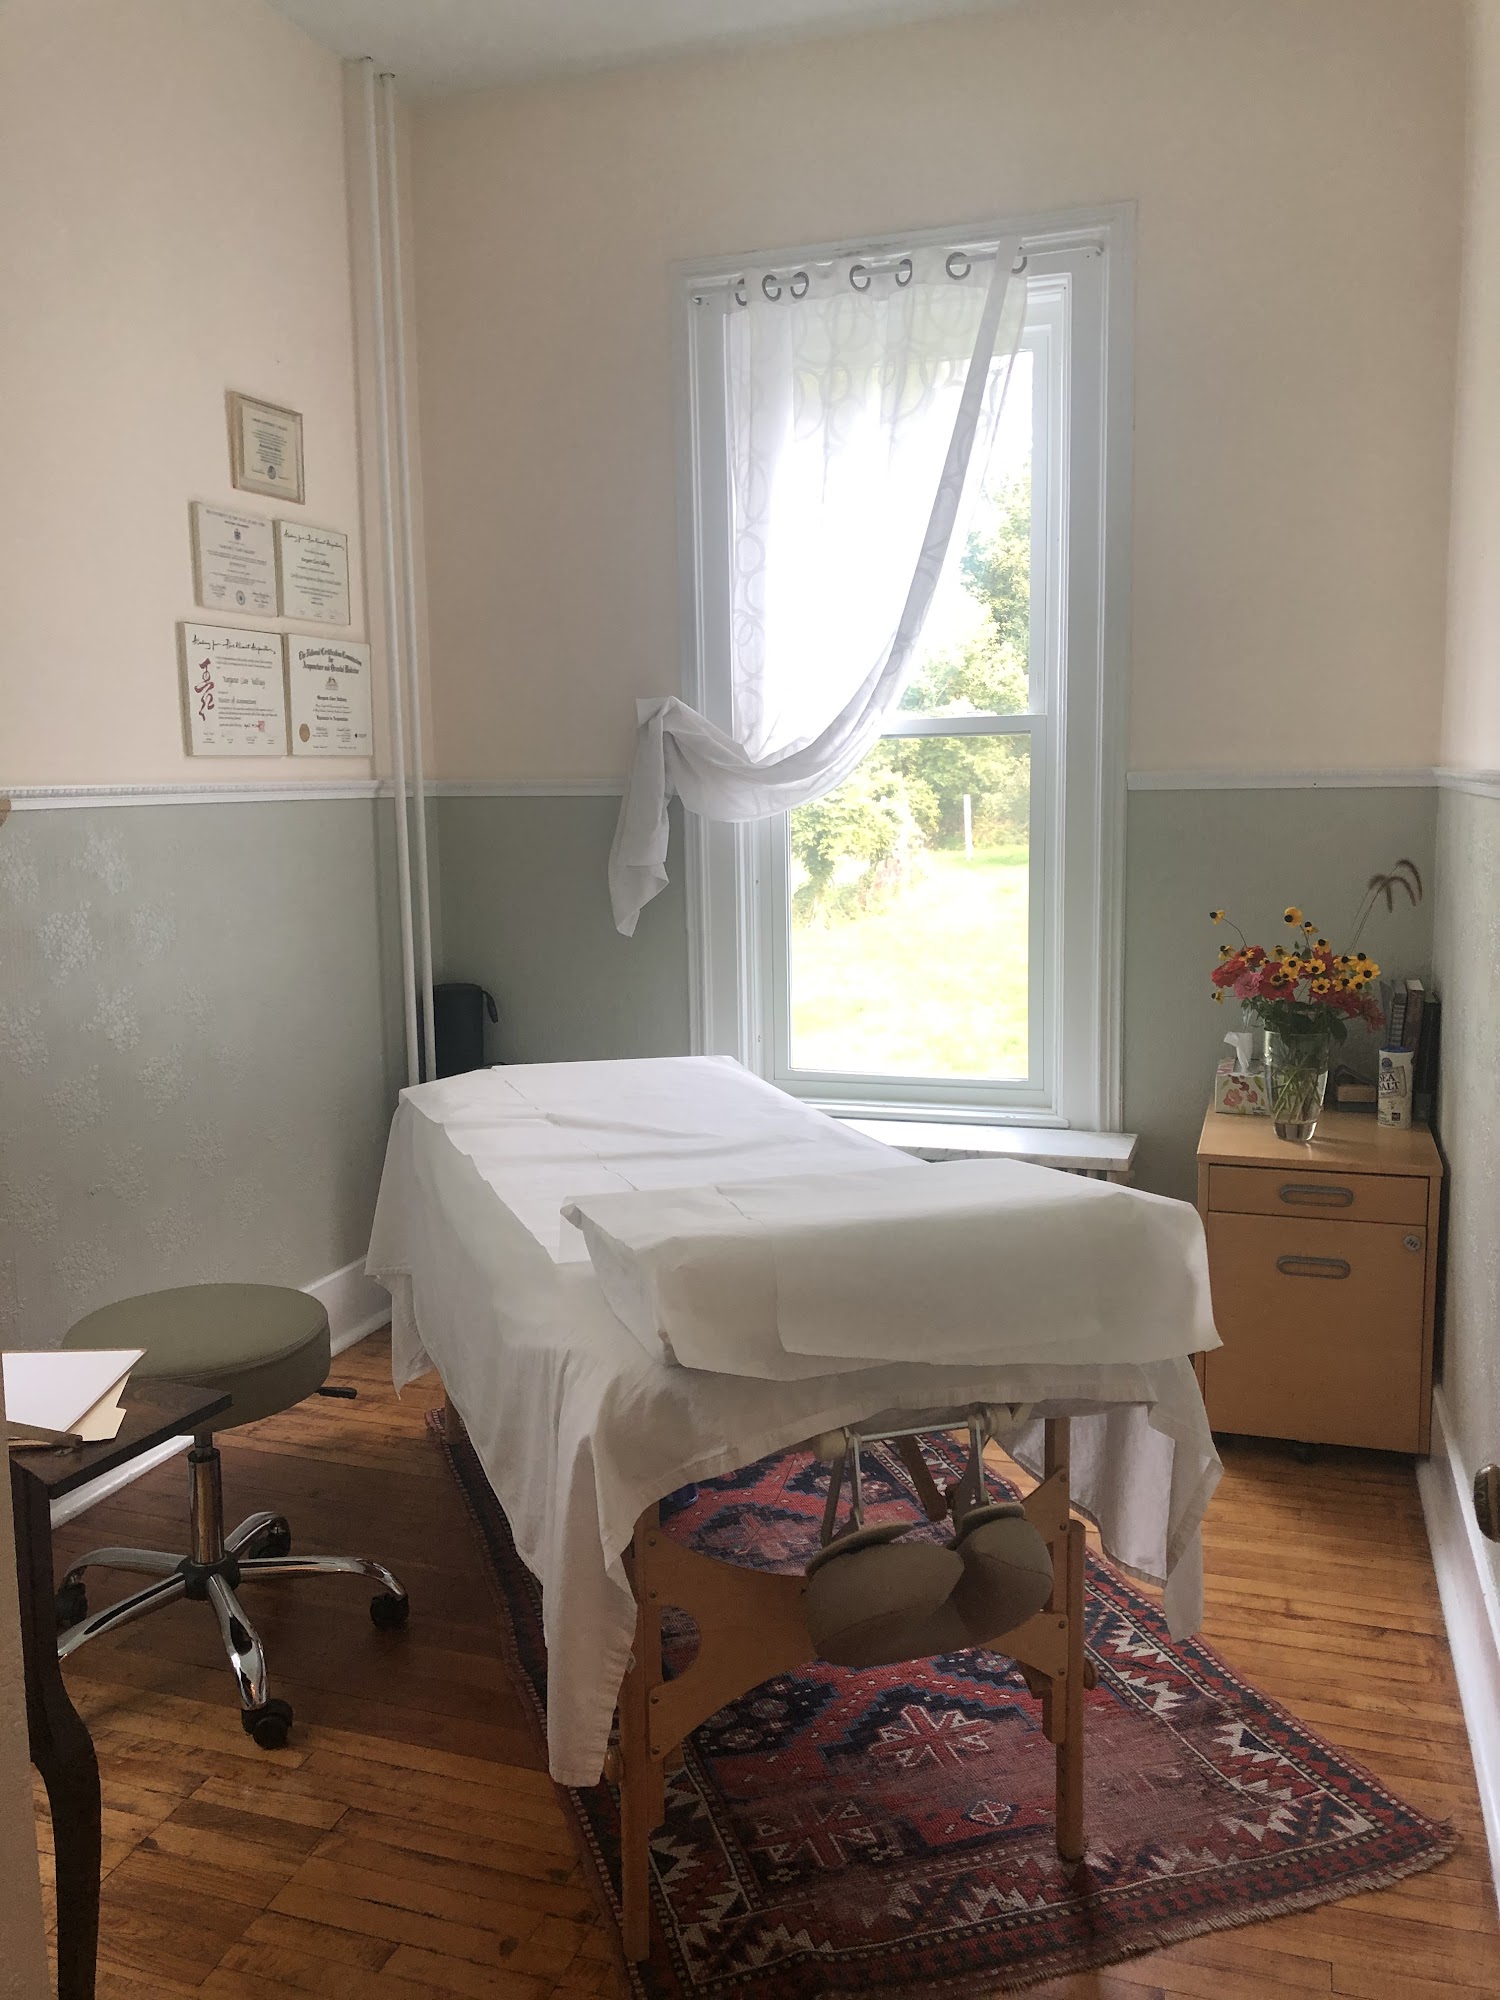 Five Element Acupuncture with Margaret Hallisey 7 Maple Ave, Philmont New York 12565